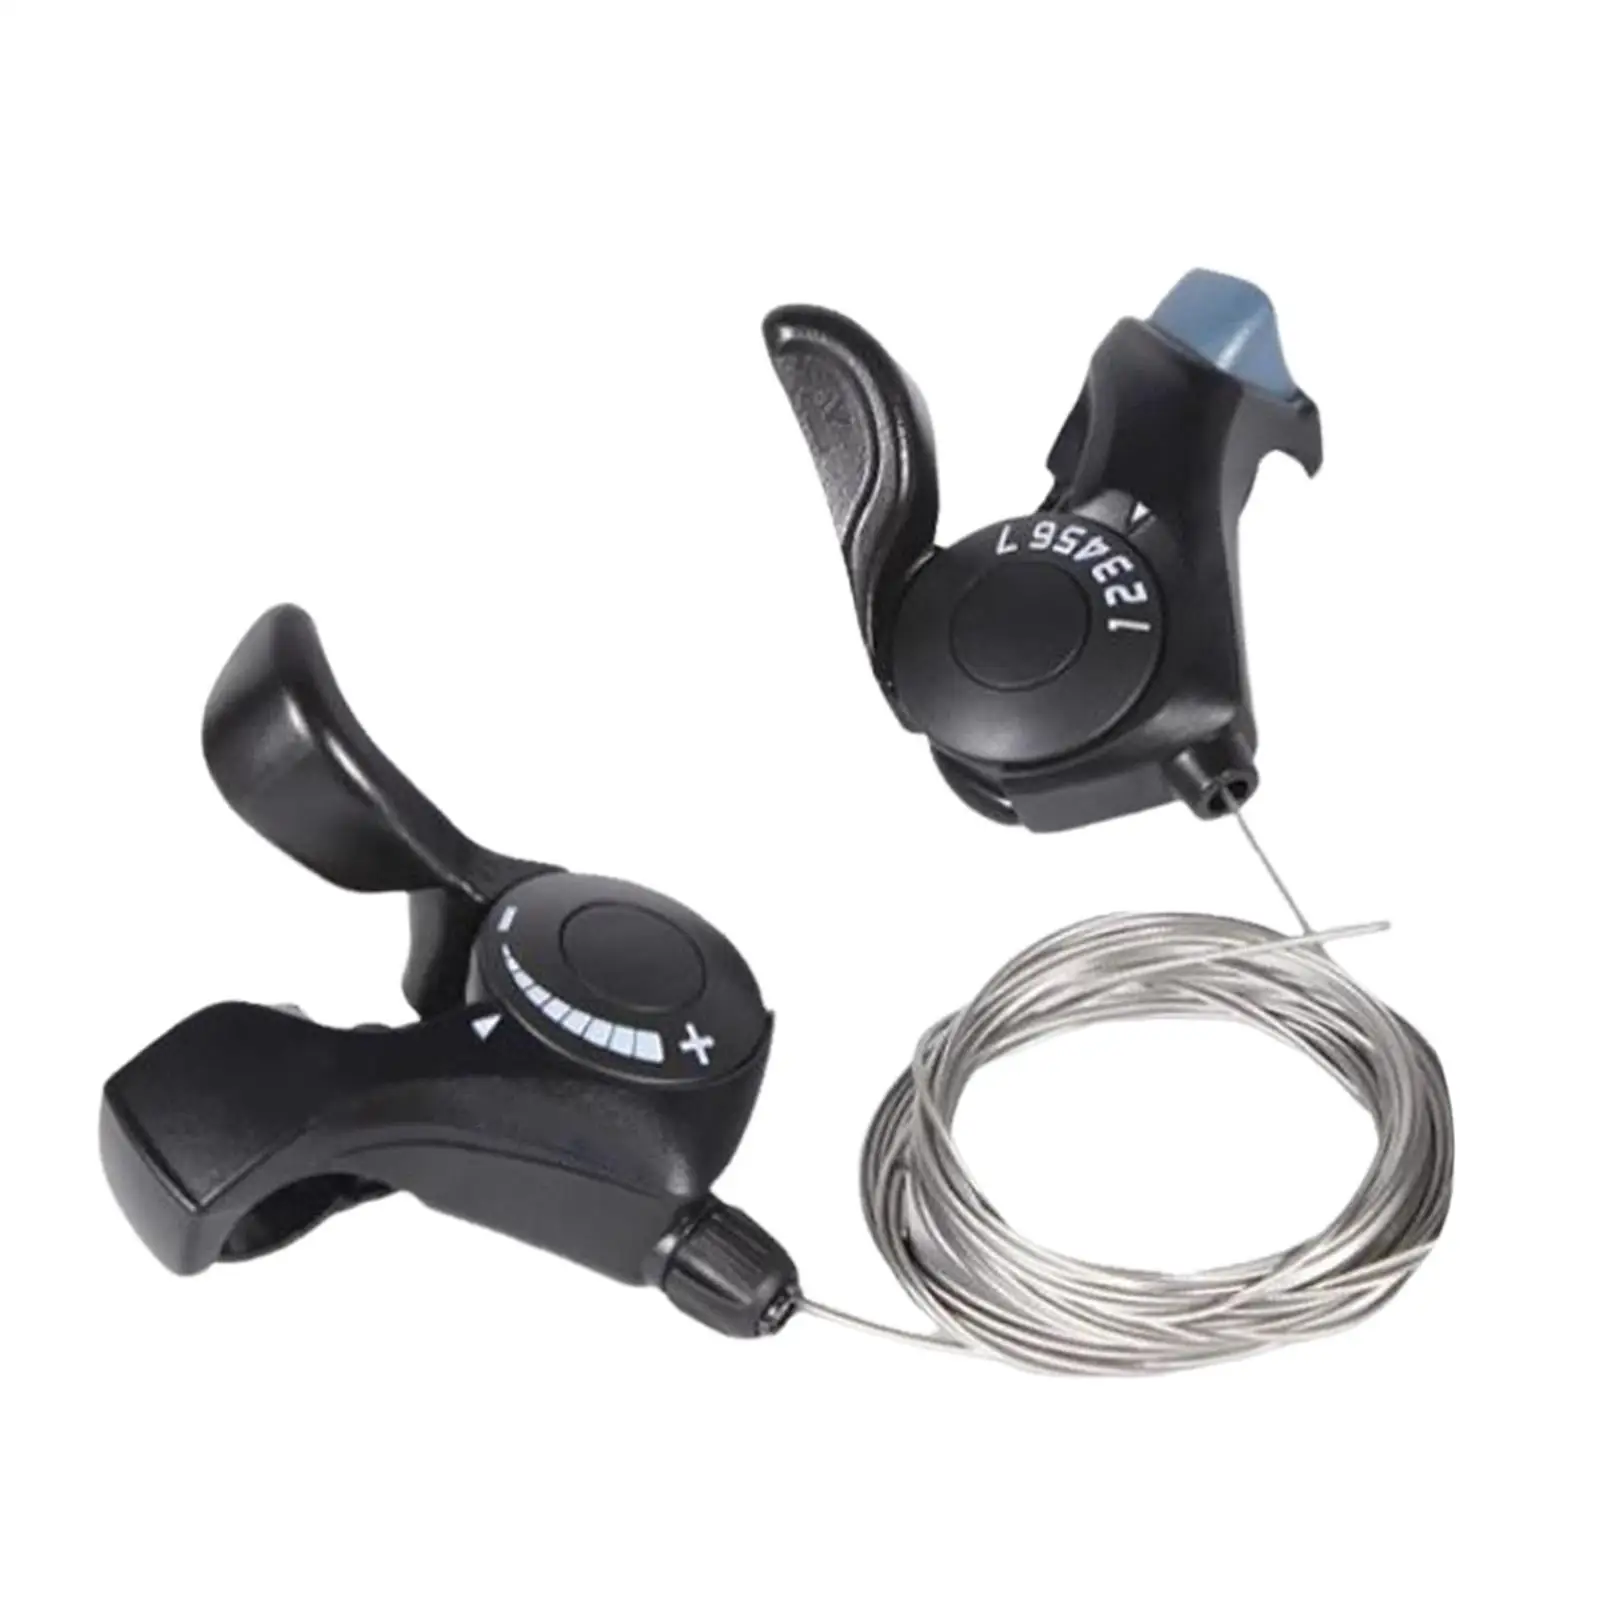 1 Pair Bike Shifters Bicycle Left Right Lever Shifter Bicycle Thumb Gear Shifter for Bicycle Mountain Bike Outdoor Repair Tool